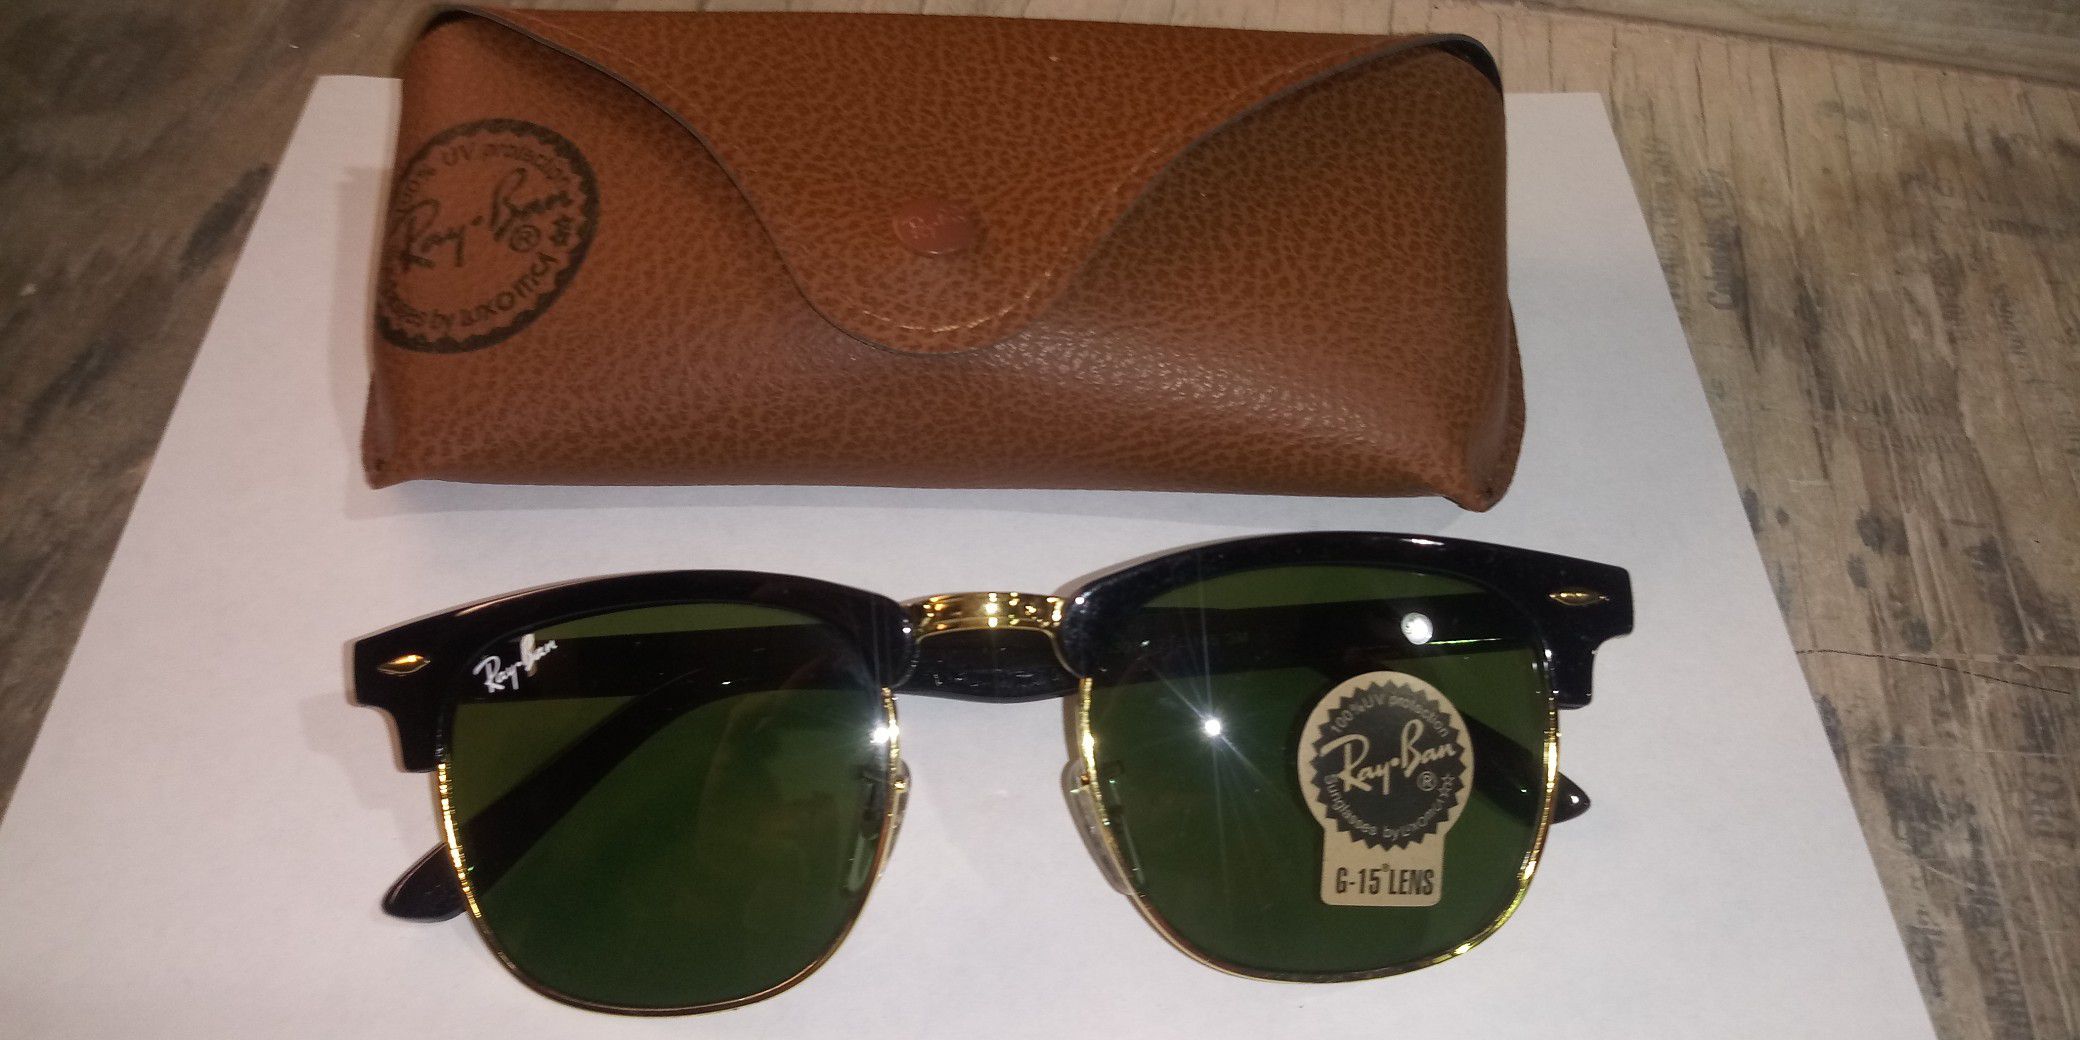 Ray Ban Women's 49mm Clubmaster Sunglasses Made in Italy Authentic Perfect Mint Glass lenses Not Plastic lenses